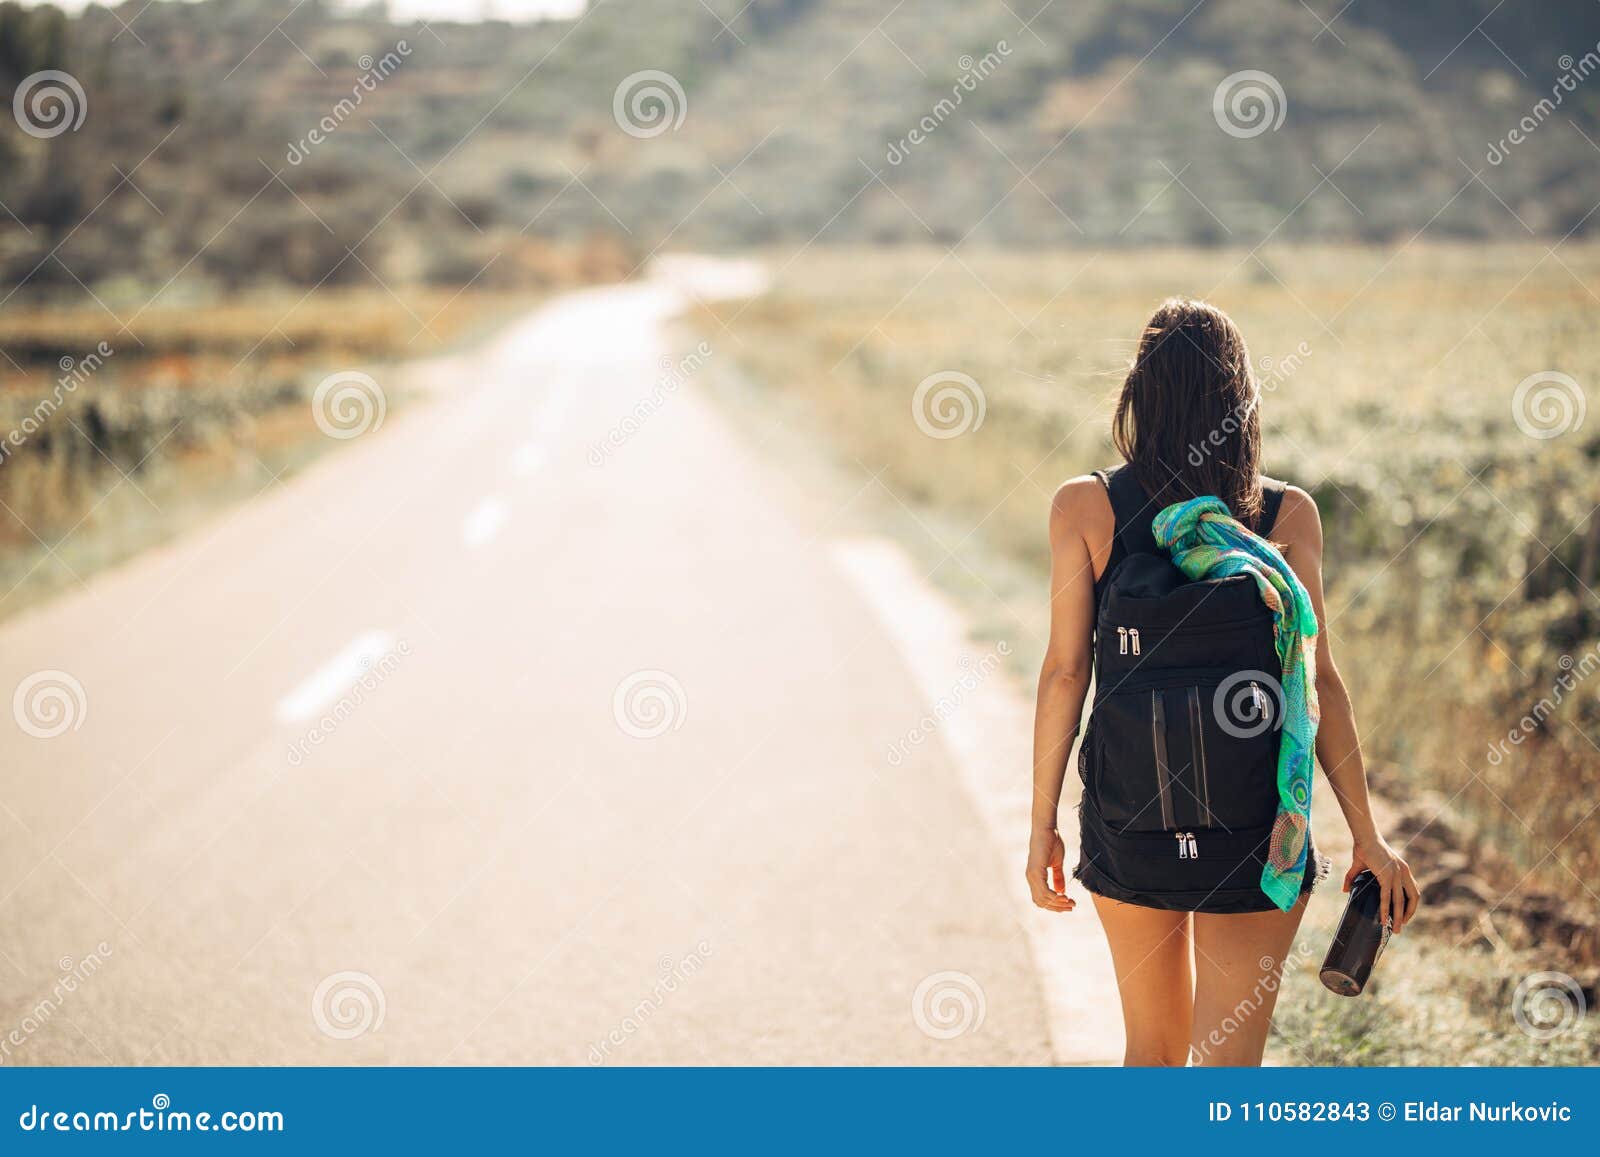 young backpacking adventurous woman hitchhiking on the road.traveling backpacks volume,packing essentials.travel lifestyle